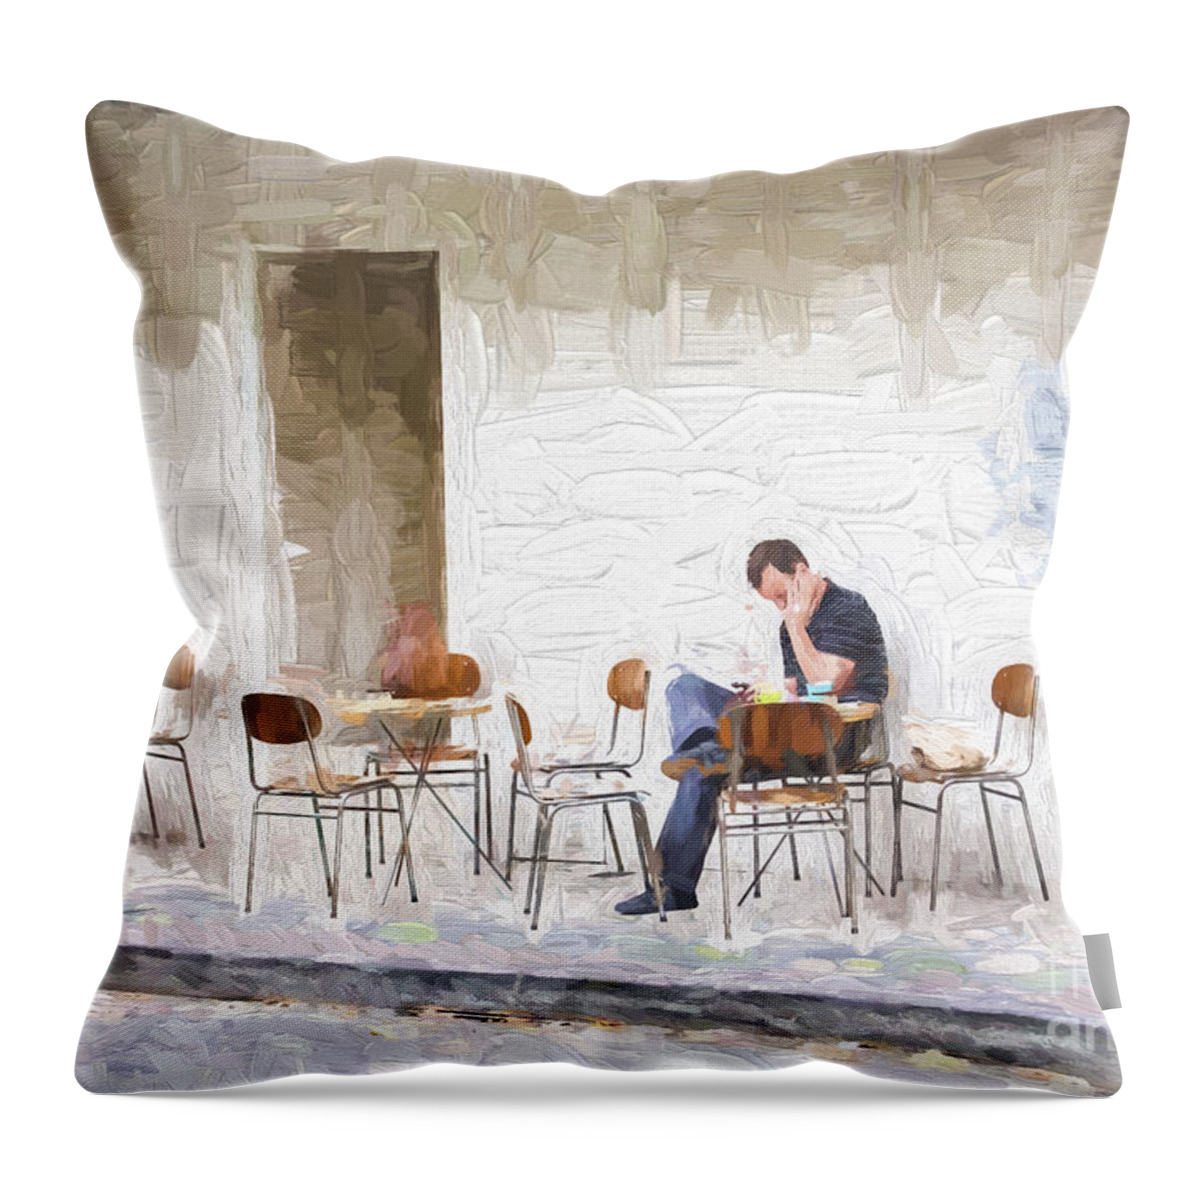 Man In Cafe Throw Pillow featuring the photograph Man in cafe by Sheila Smart Fine Art Photography